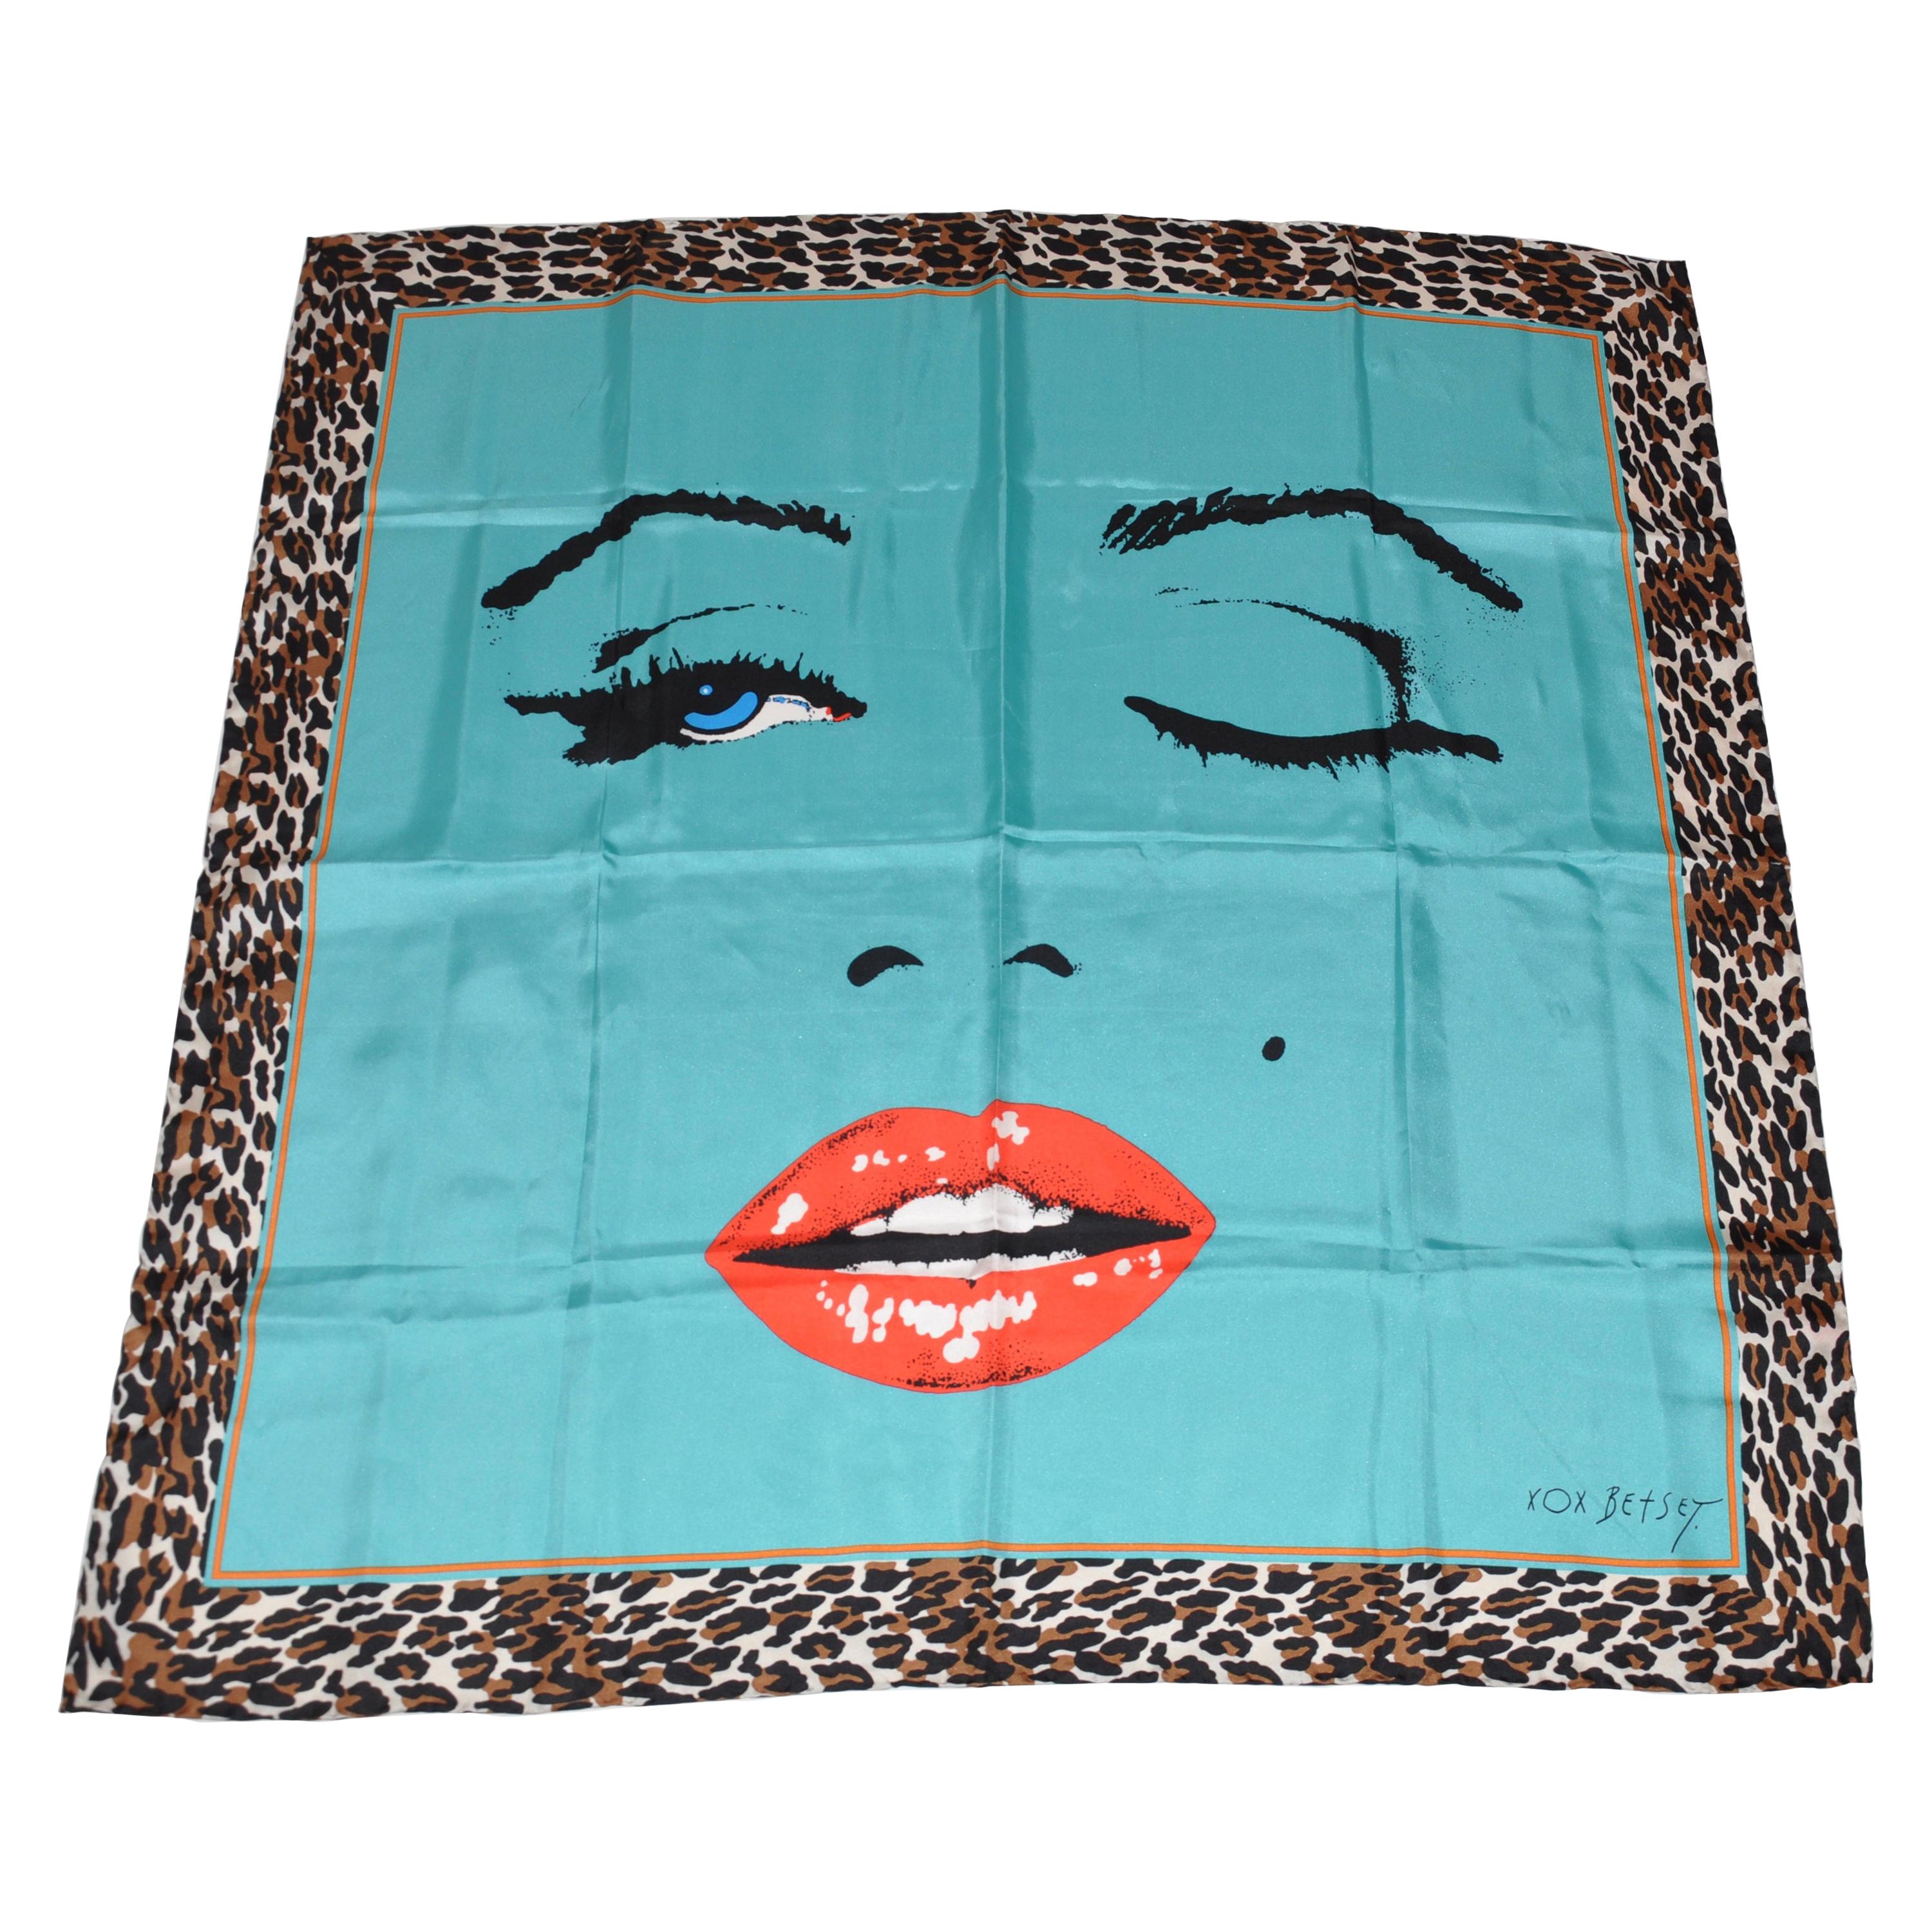 Betsy Johnson Bold Turquoise with Leopard "Self Portrait" Silk Scarf